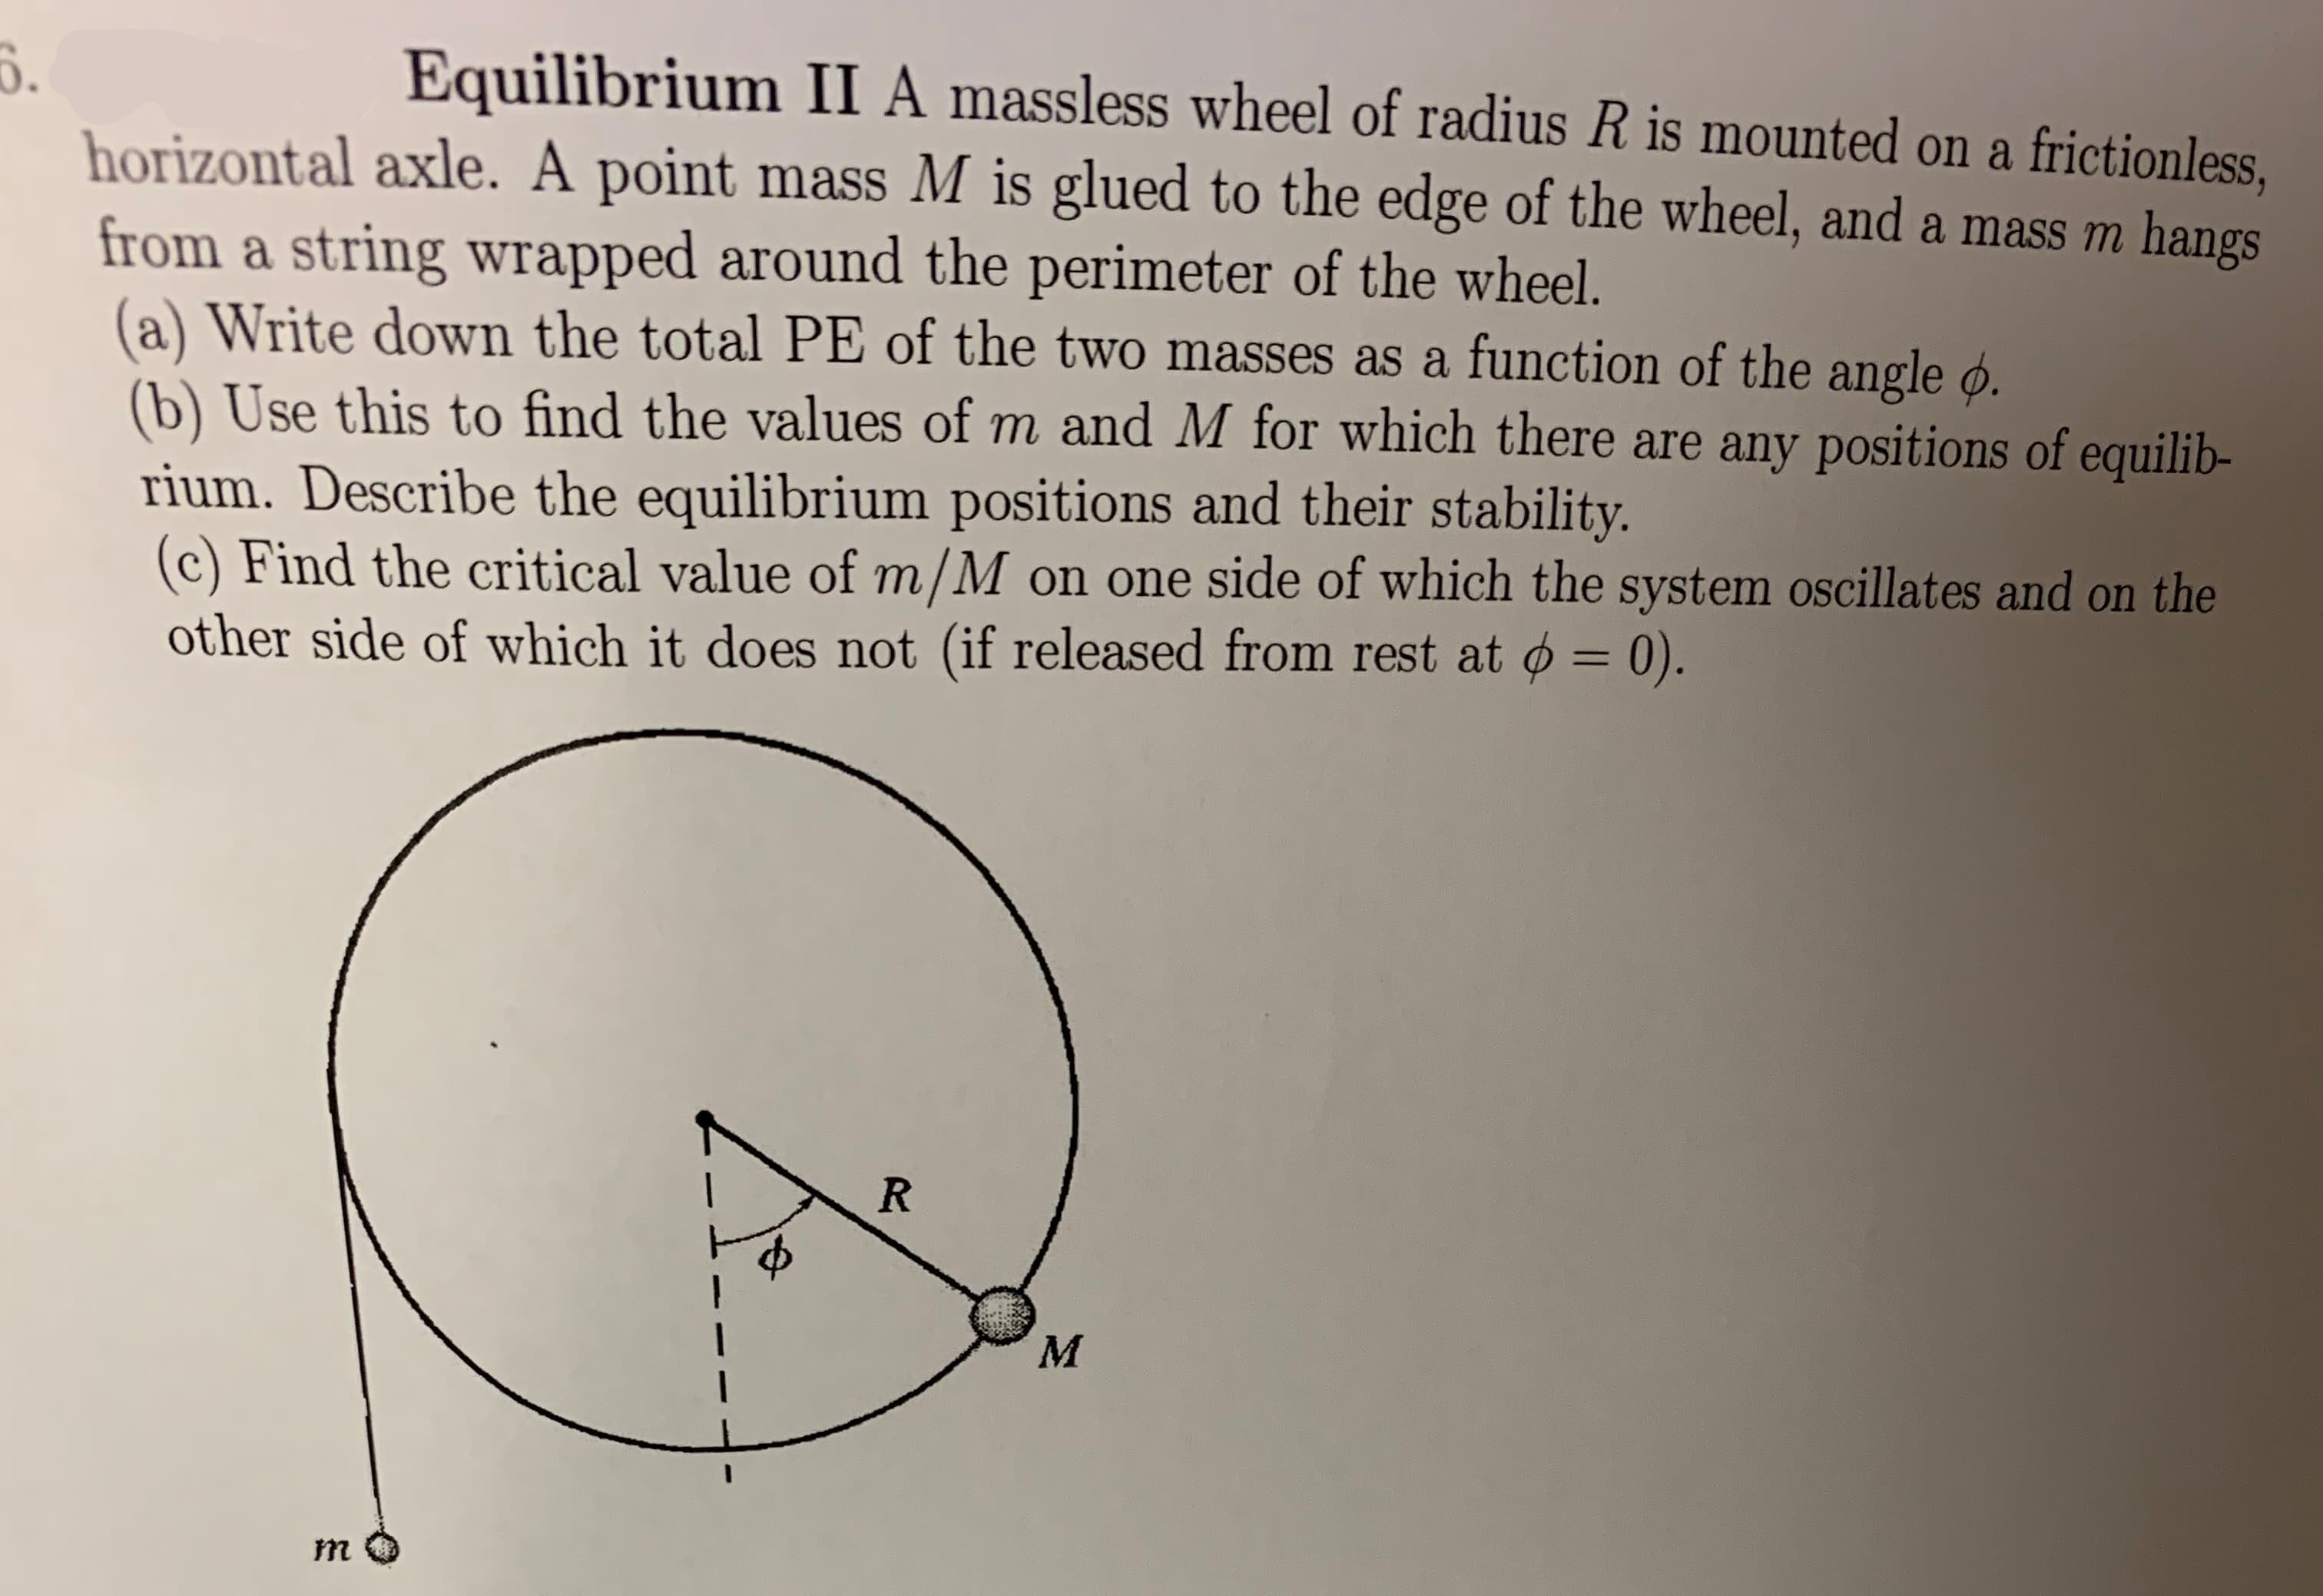 Equilibrium II A massless wheel of radius R is mounted on a frictionless,
horizontal axle. A point mass M is glued to the edge of the wheel, and a mass m hangs
from a string wrapped around the perimeter of the wheel.
(a) Write down the total PE of the two masses as a function of the angle O.
(b) Use this to find the values of m and M for which there are any positions of equilib-
rium. Describe the equilibrium positions and their stability.
(c) Find the critical value of m/M
other side of which it does not (if released from rest at o= 0).
on one side of which the system oscillates and on the
R
М
m
